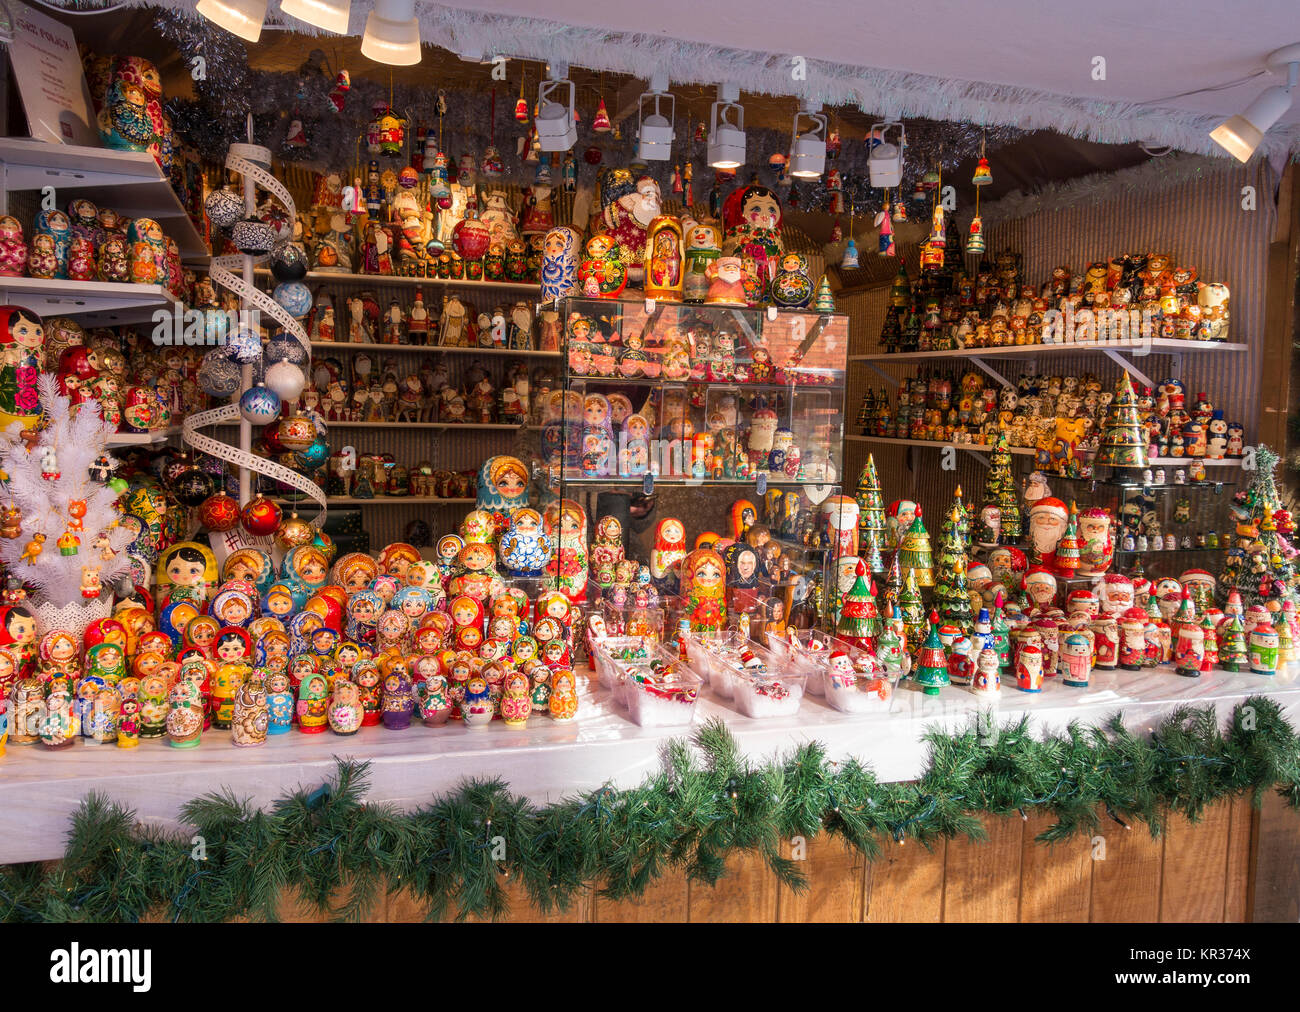 A small outdoor shop selling nesting dolls at the Toronto Christmas market in the distillery district, an arts, shopping and tourist destination. Stock Photo